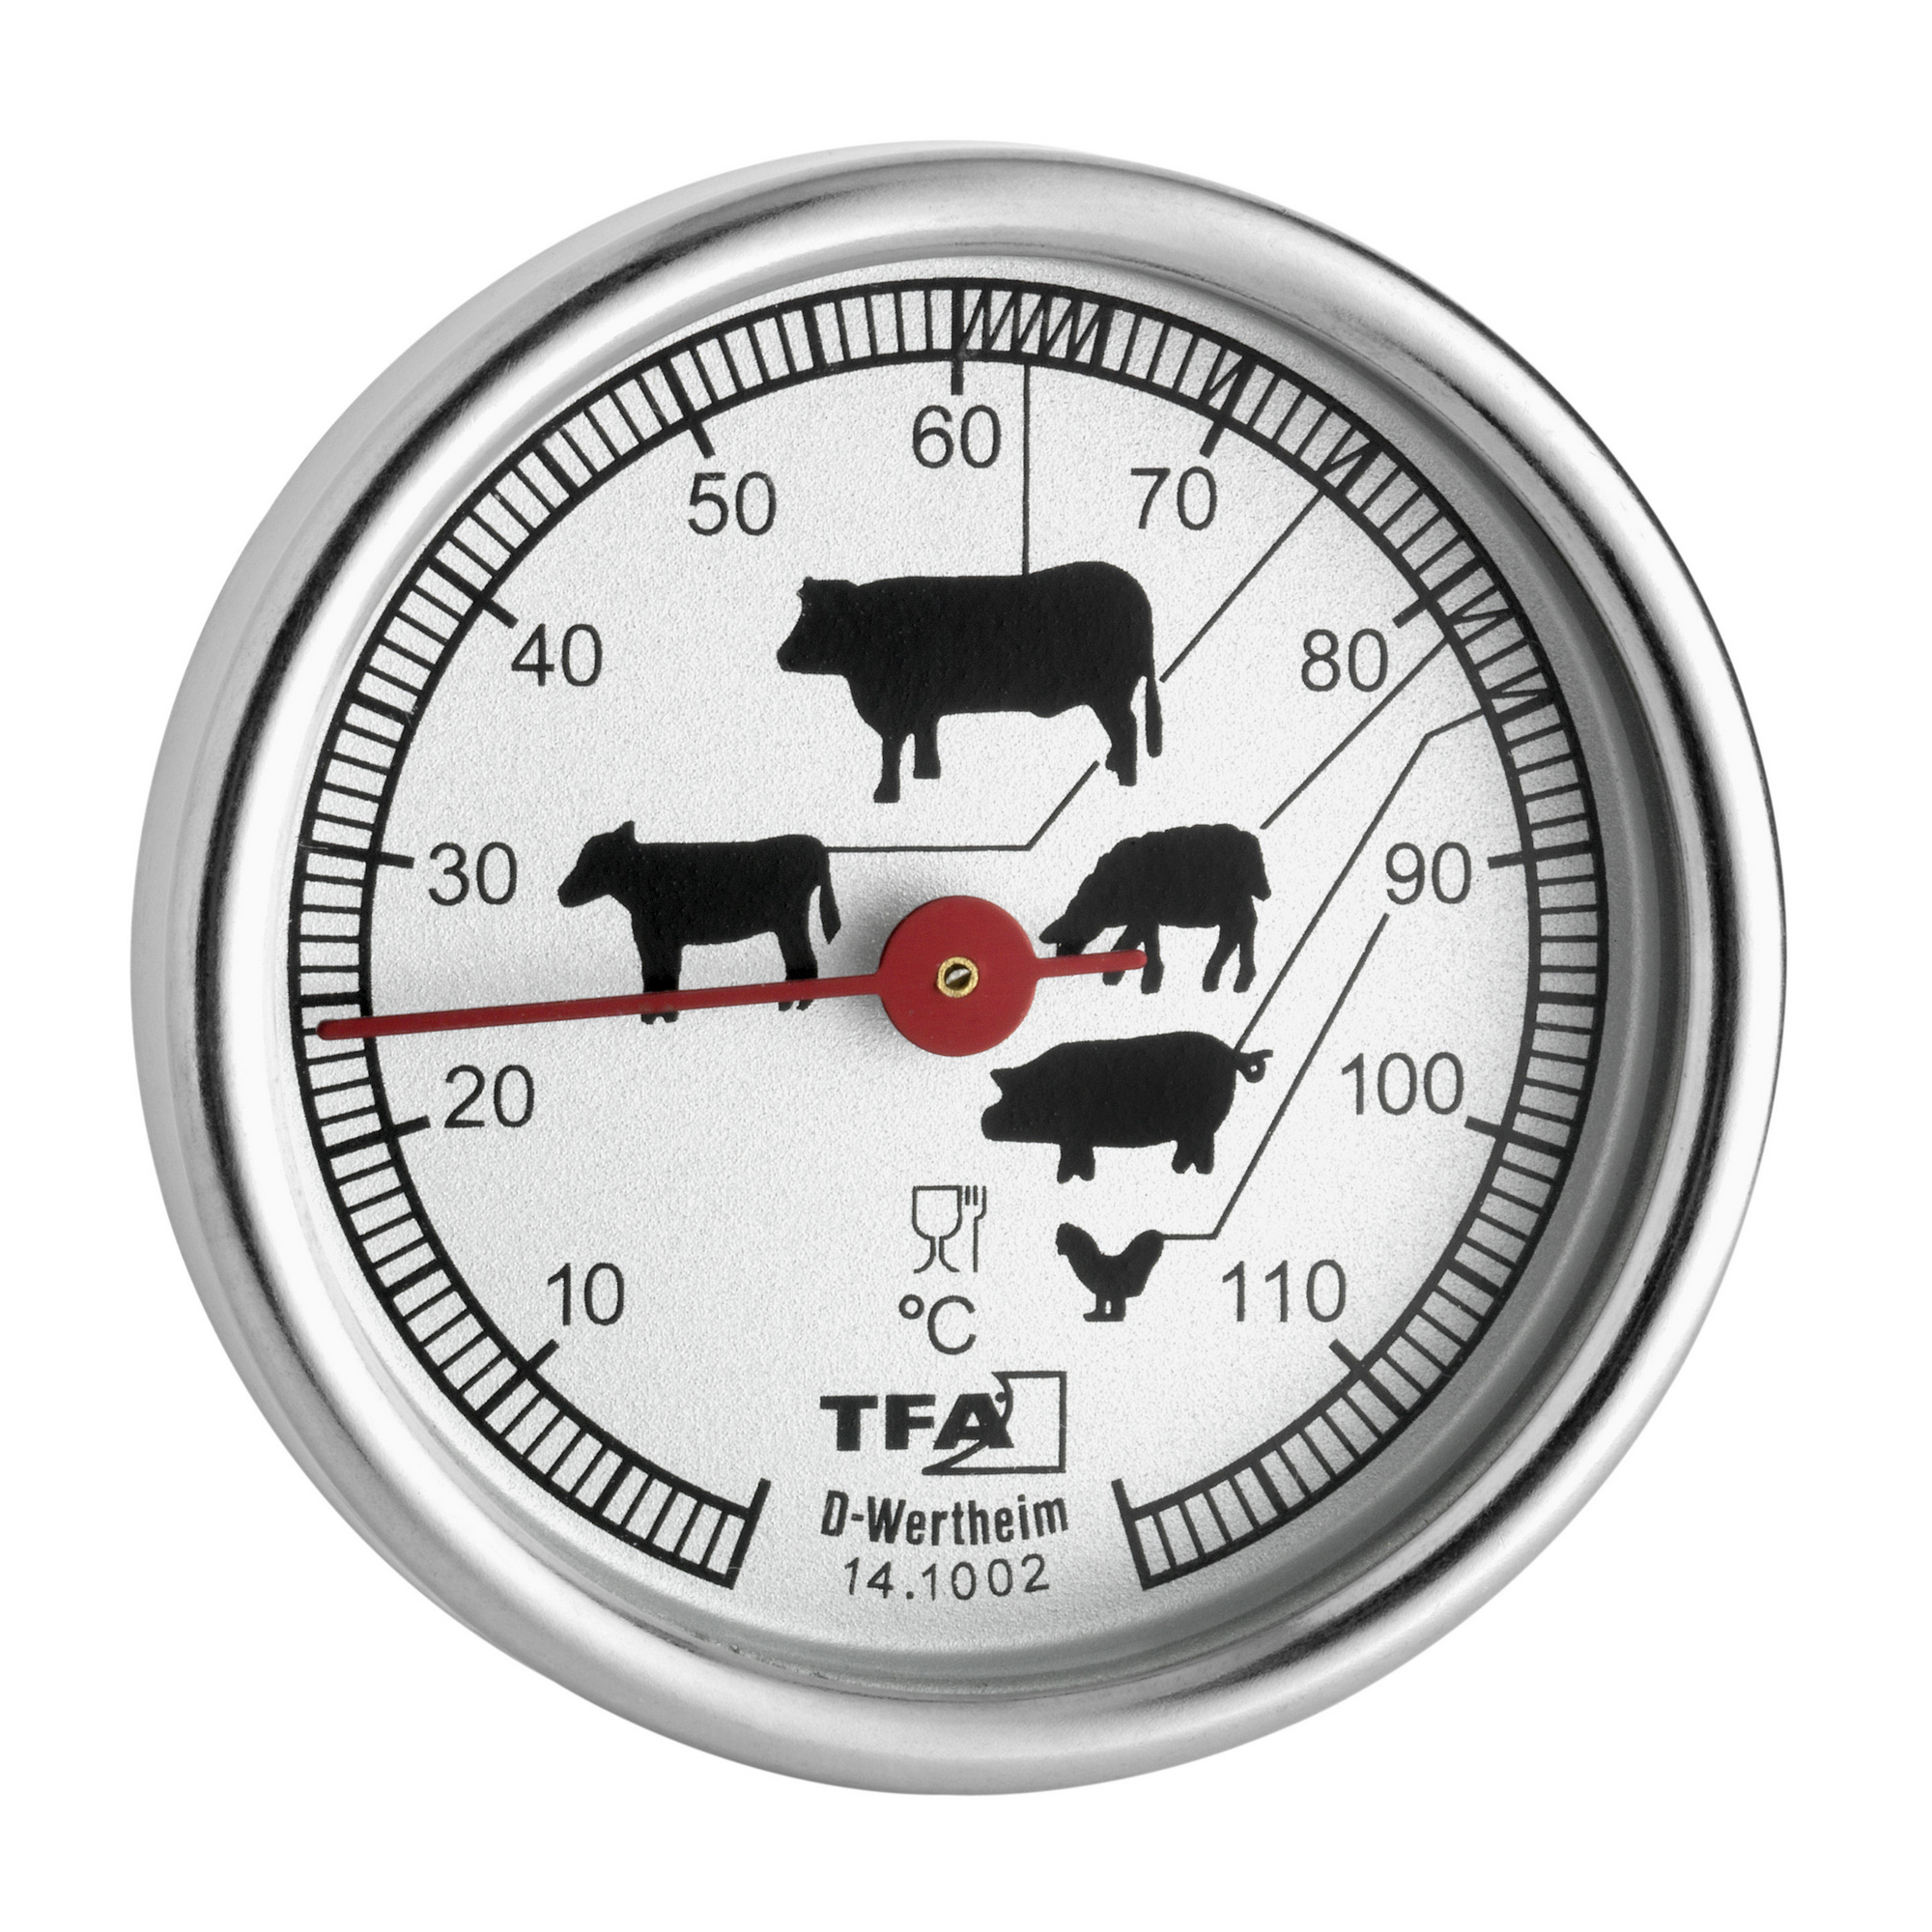 Bratenthermometer Edelstahl + product picture